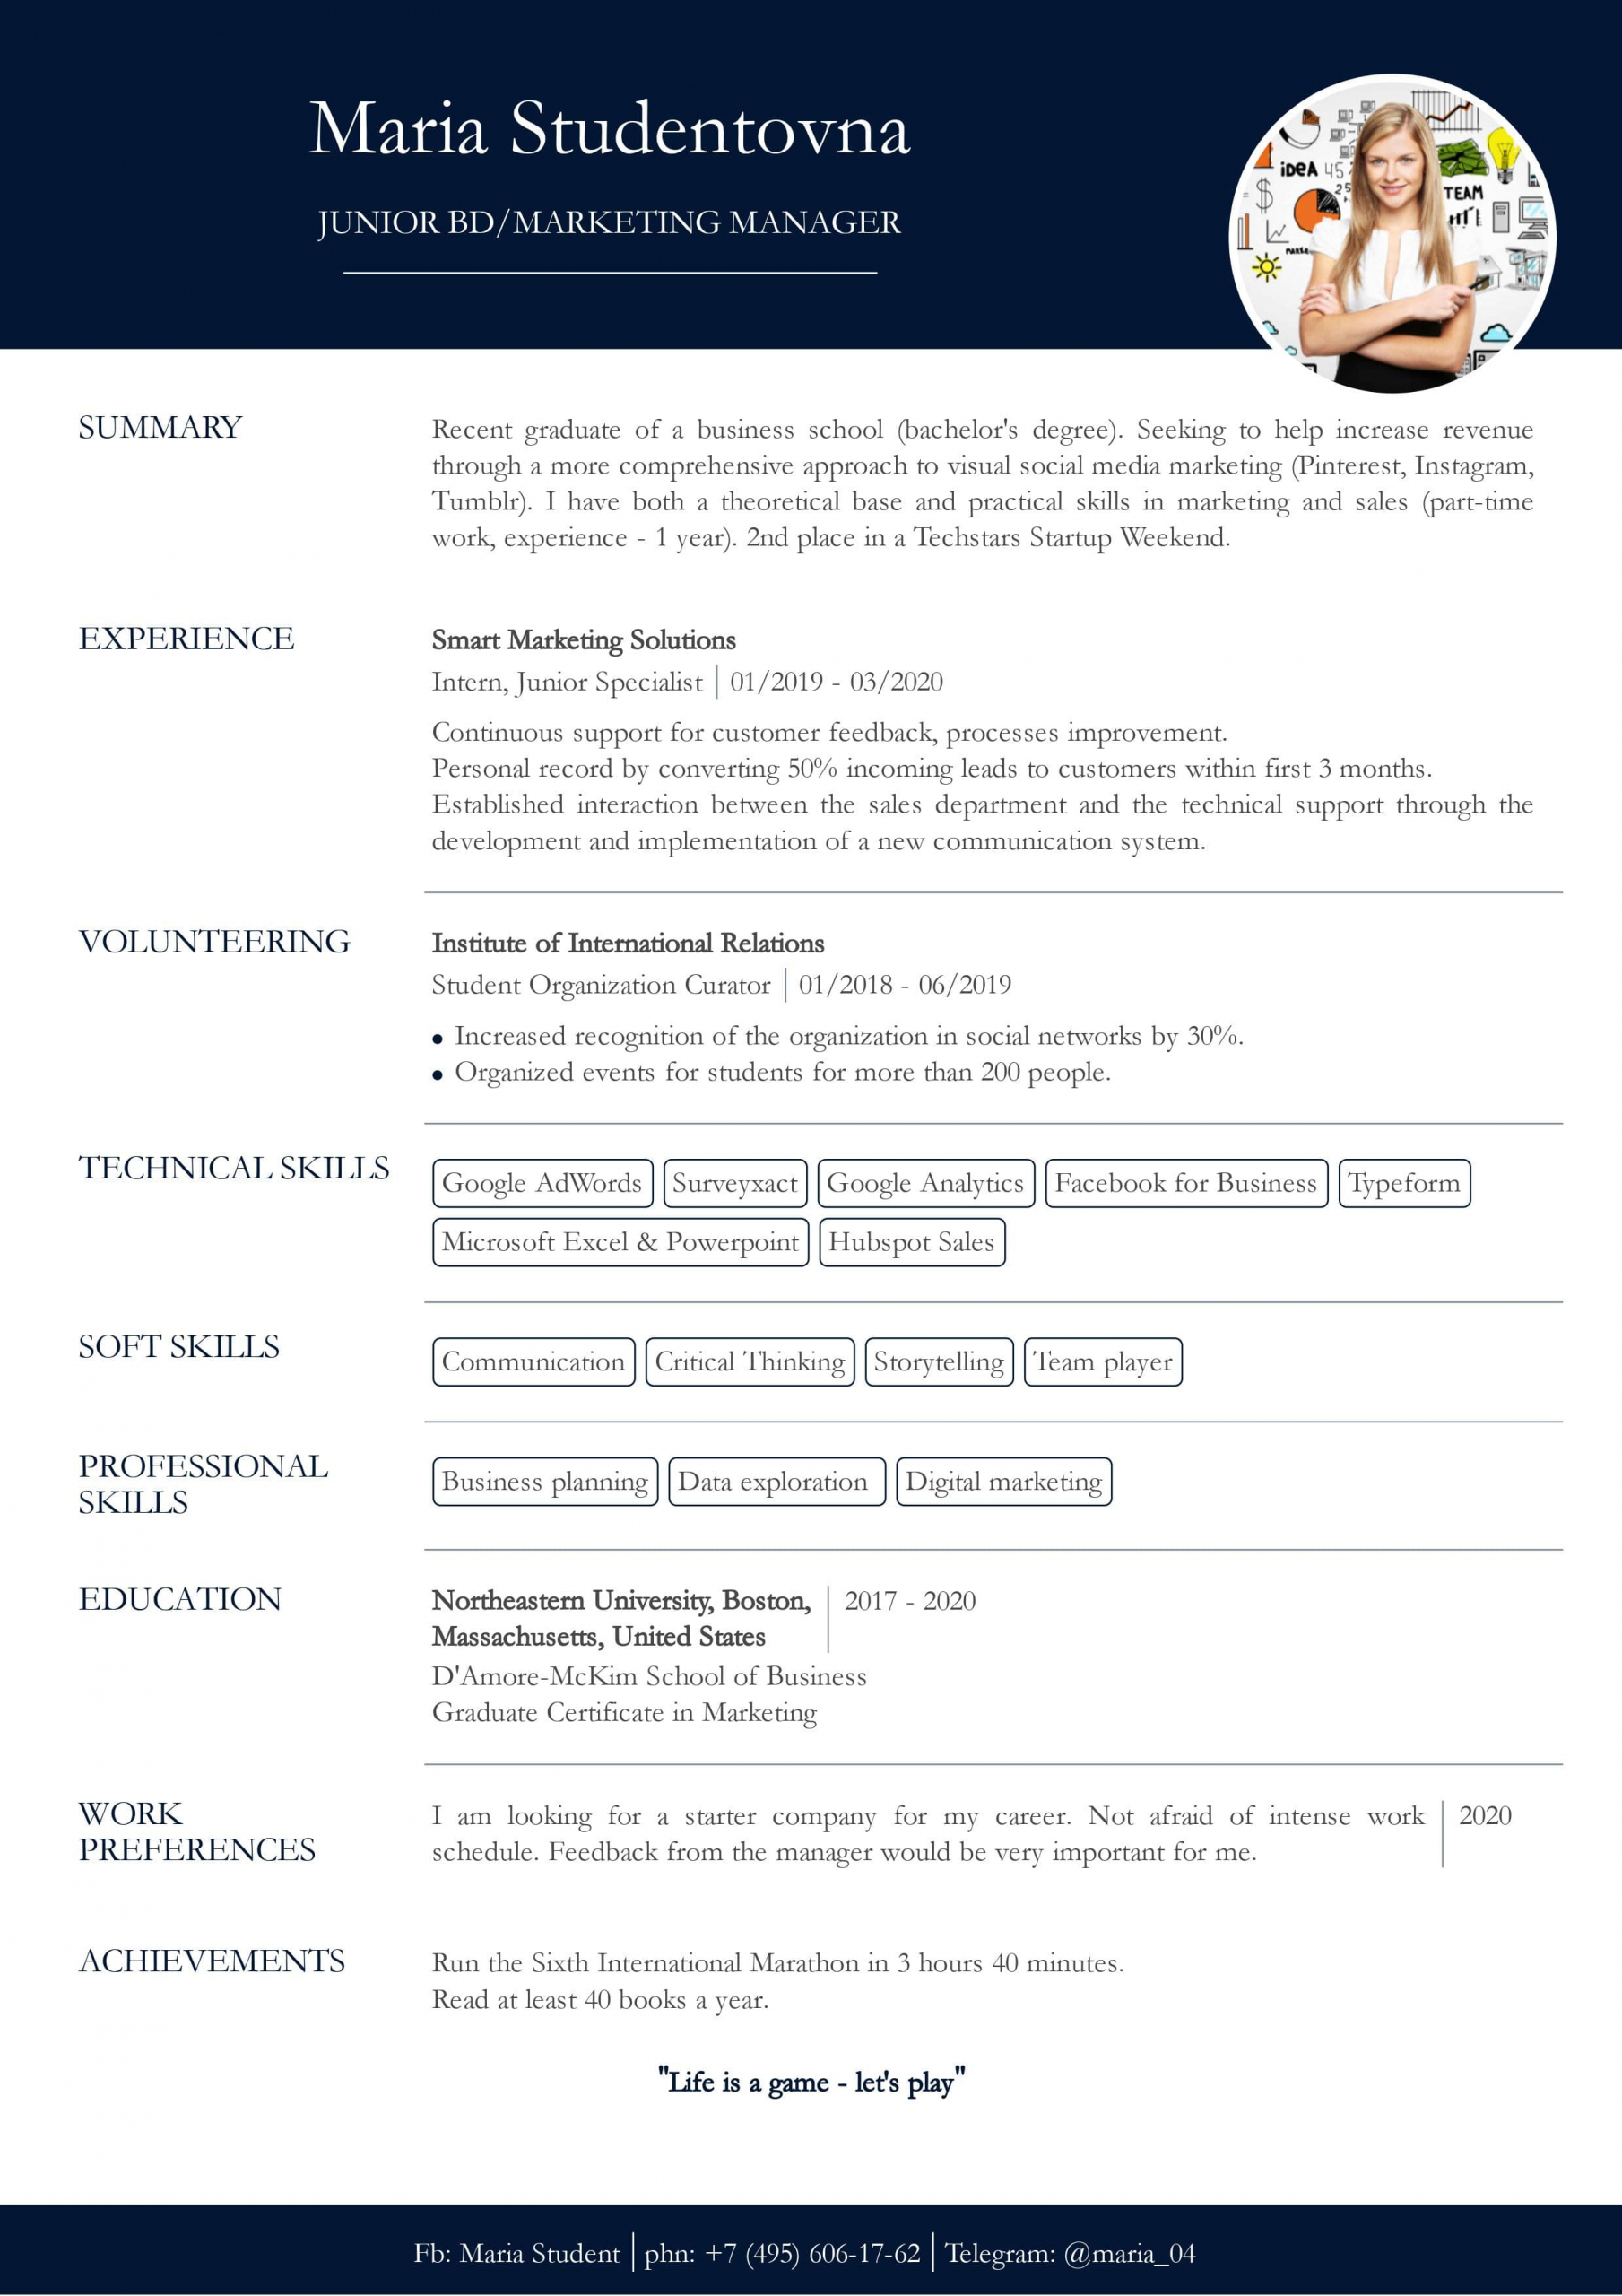 Sample resume of a marketing manager